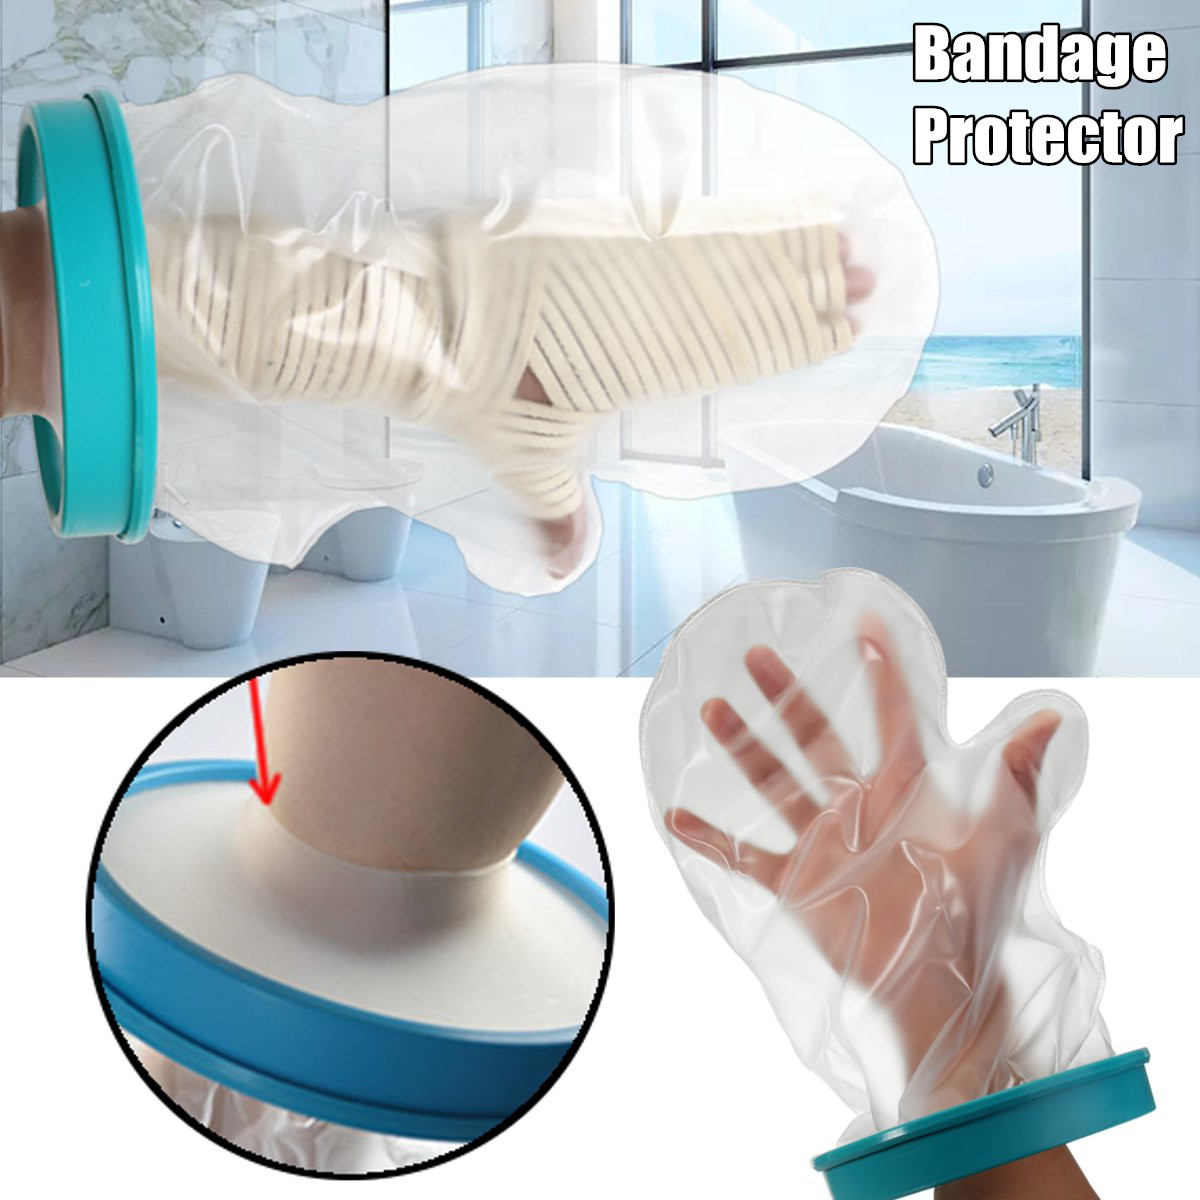 Seal-Adult-Cast-Bandage-Protector-Cover-Waterproof-Case-Hand-Medical-Bath-1641260